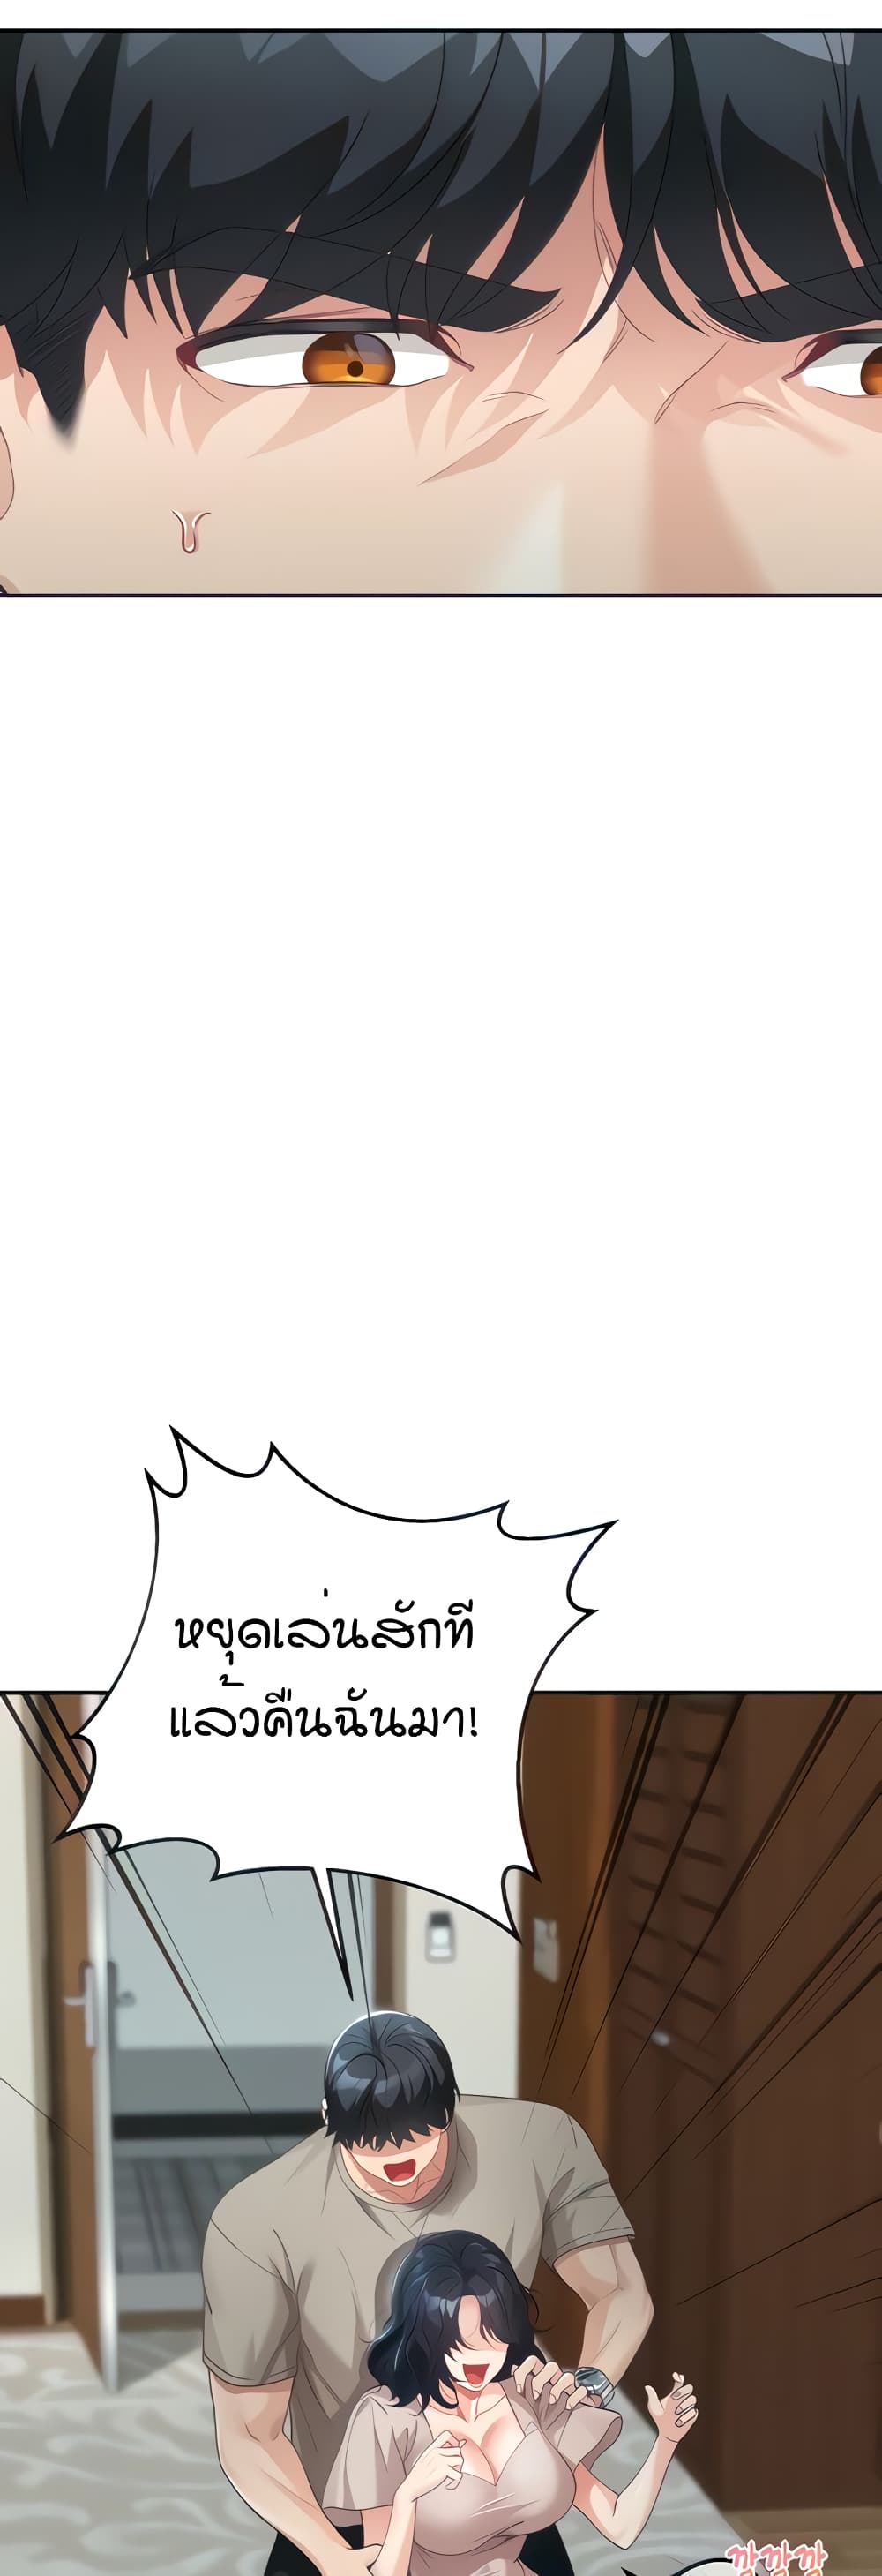 Is It Your Mother or Sister? ตอนที่ 5 ภาพ 15